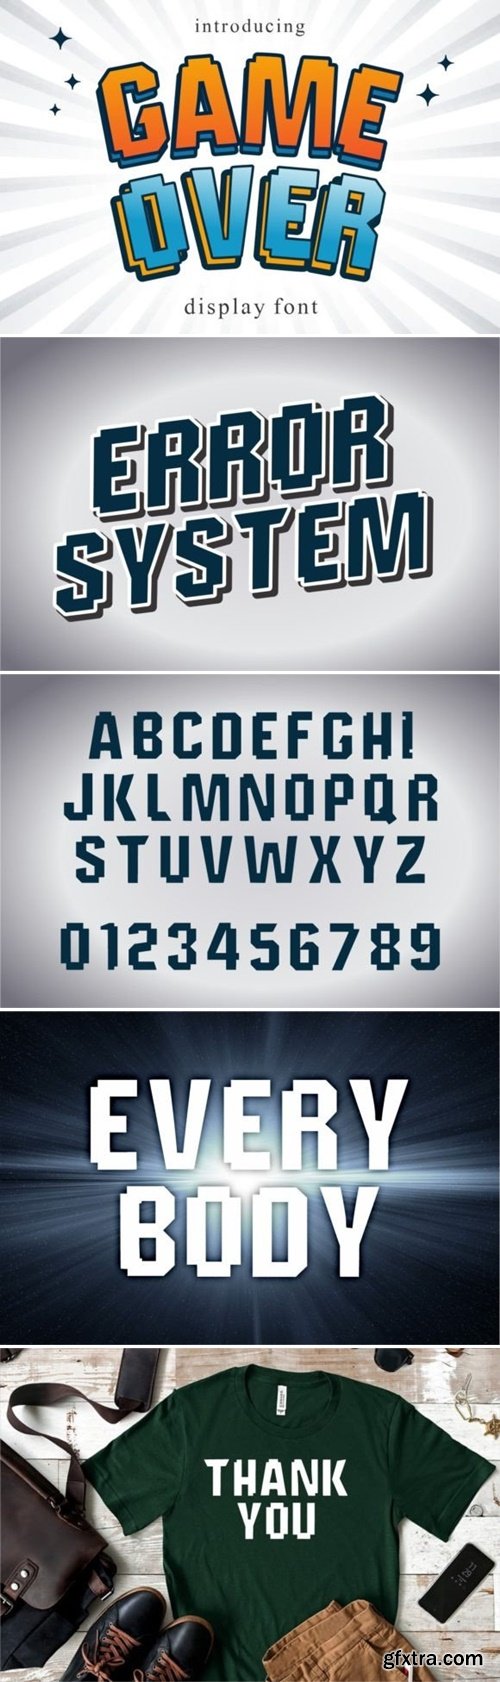 Game over Font